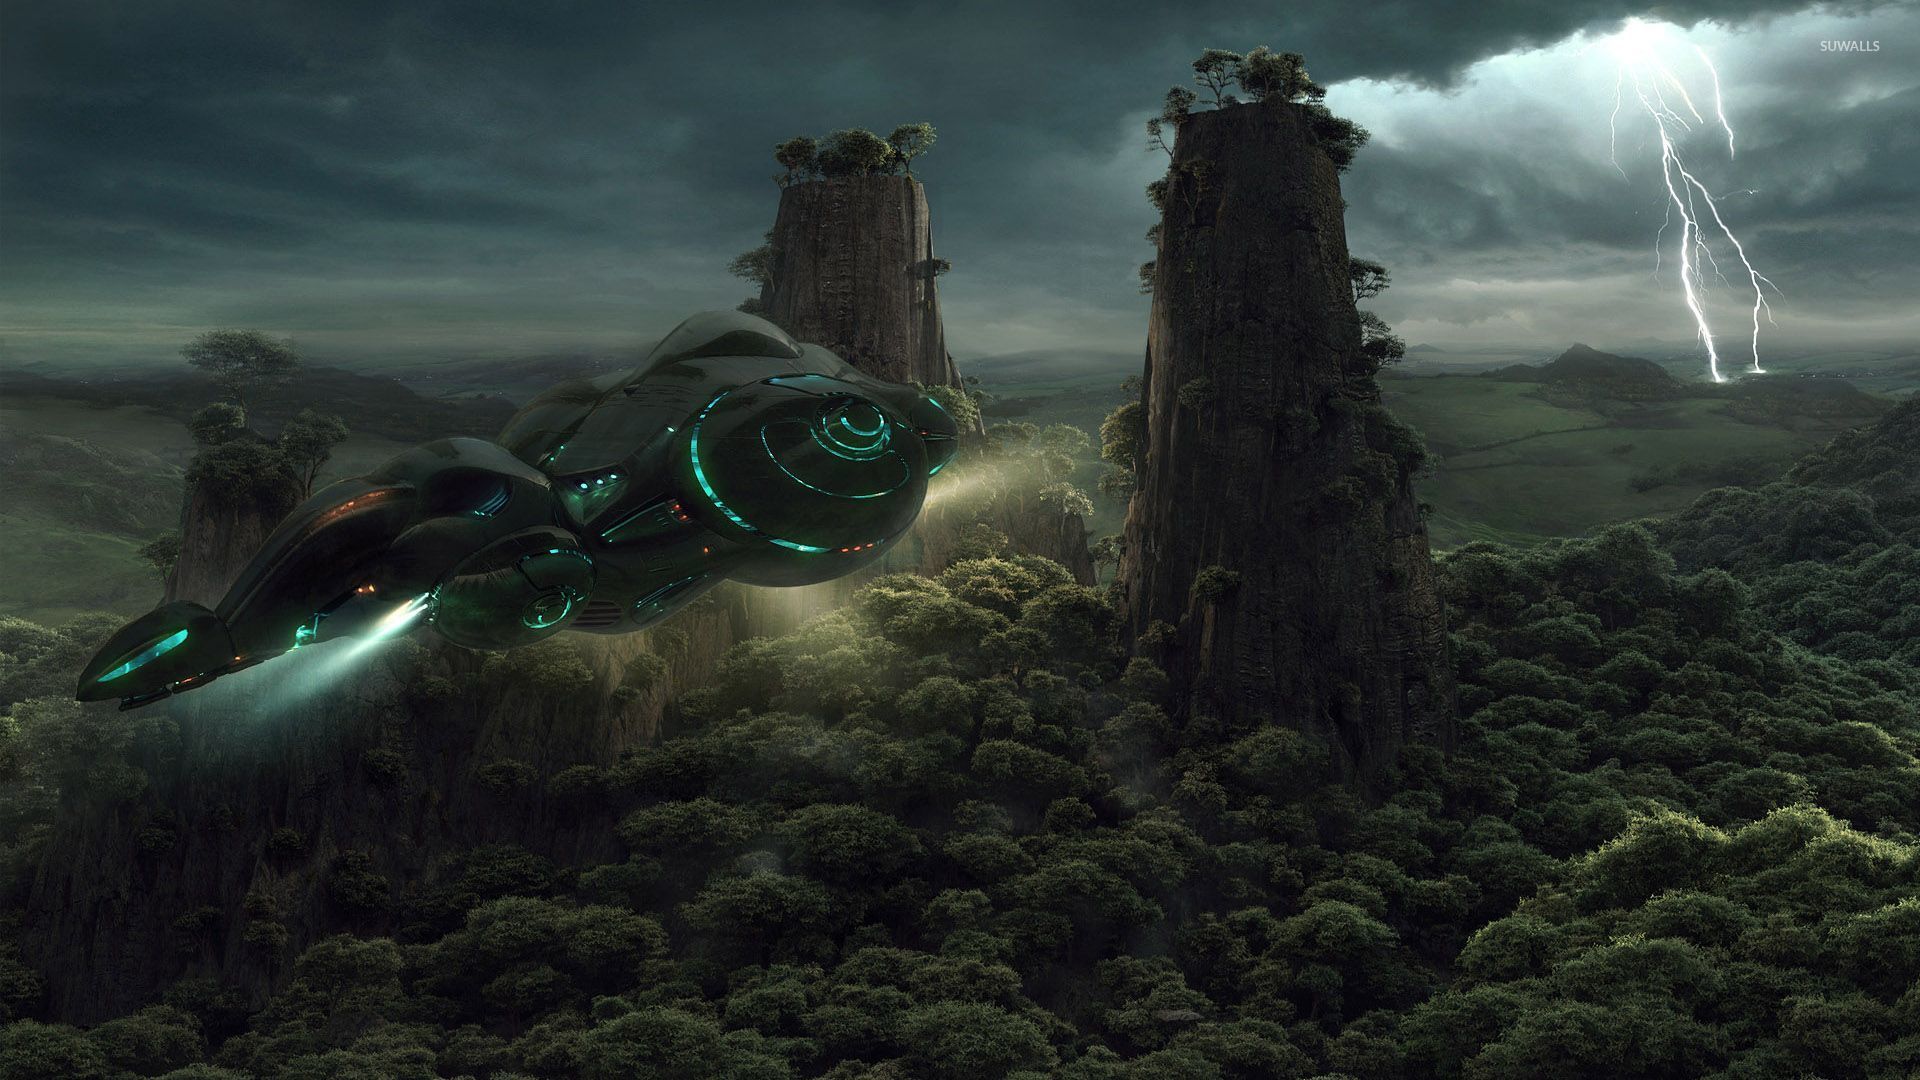 spaceship-flying-above-the-jungle-29460-1920x1080.jpg